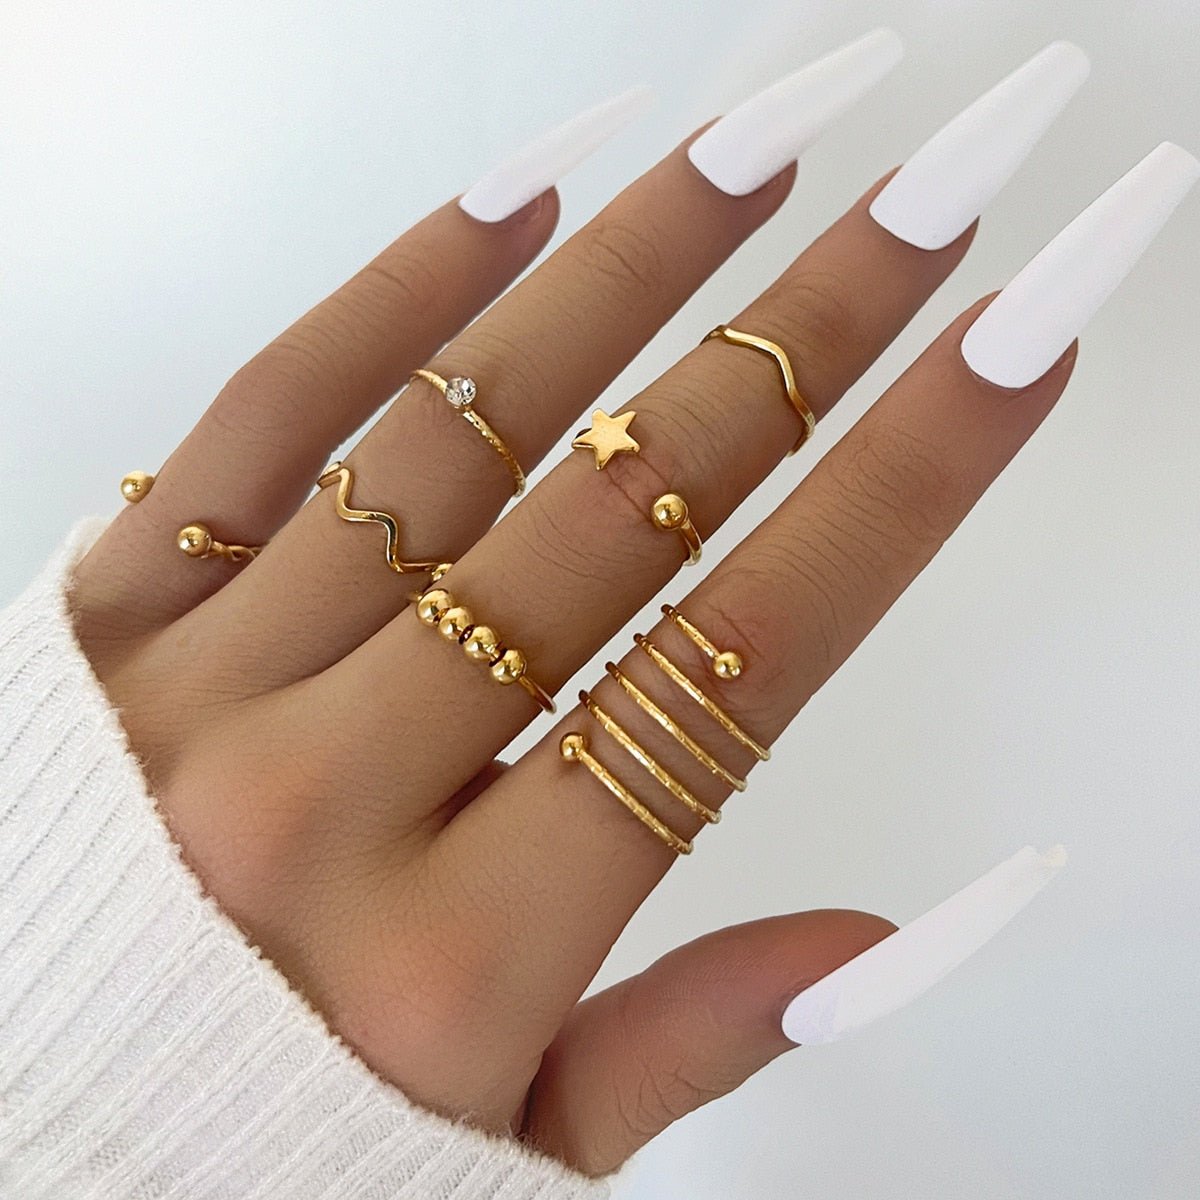 Fashionista Metal Chain Knuckle Rings - Sweet Sentimental GiftsFashionista Metal Chain Knuckle RingsWomen's RingRinhooSweet Sentimental Gifts3256804852211366-RI20Y0006Fashionista Metal Chain Knuckle RingsShow Me The World Metal Chain Knuckle Ring038768698030